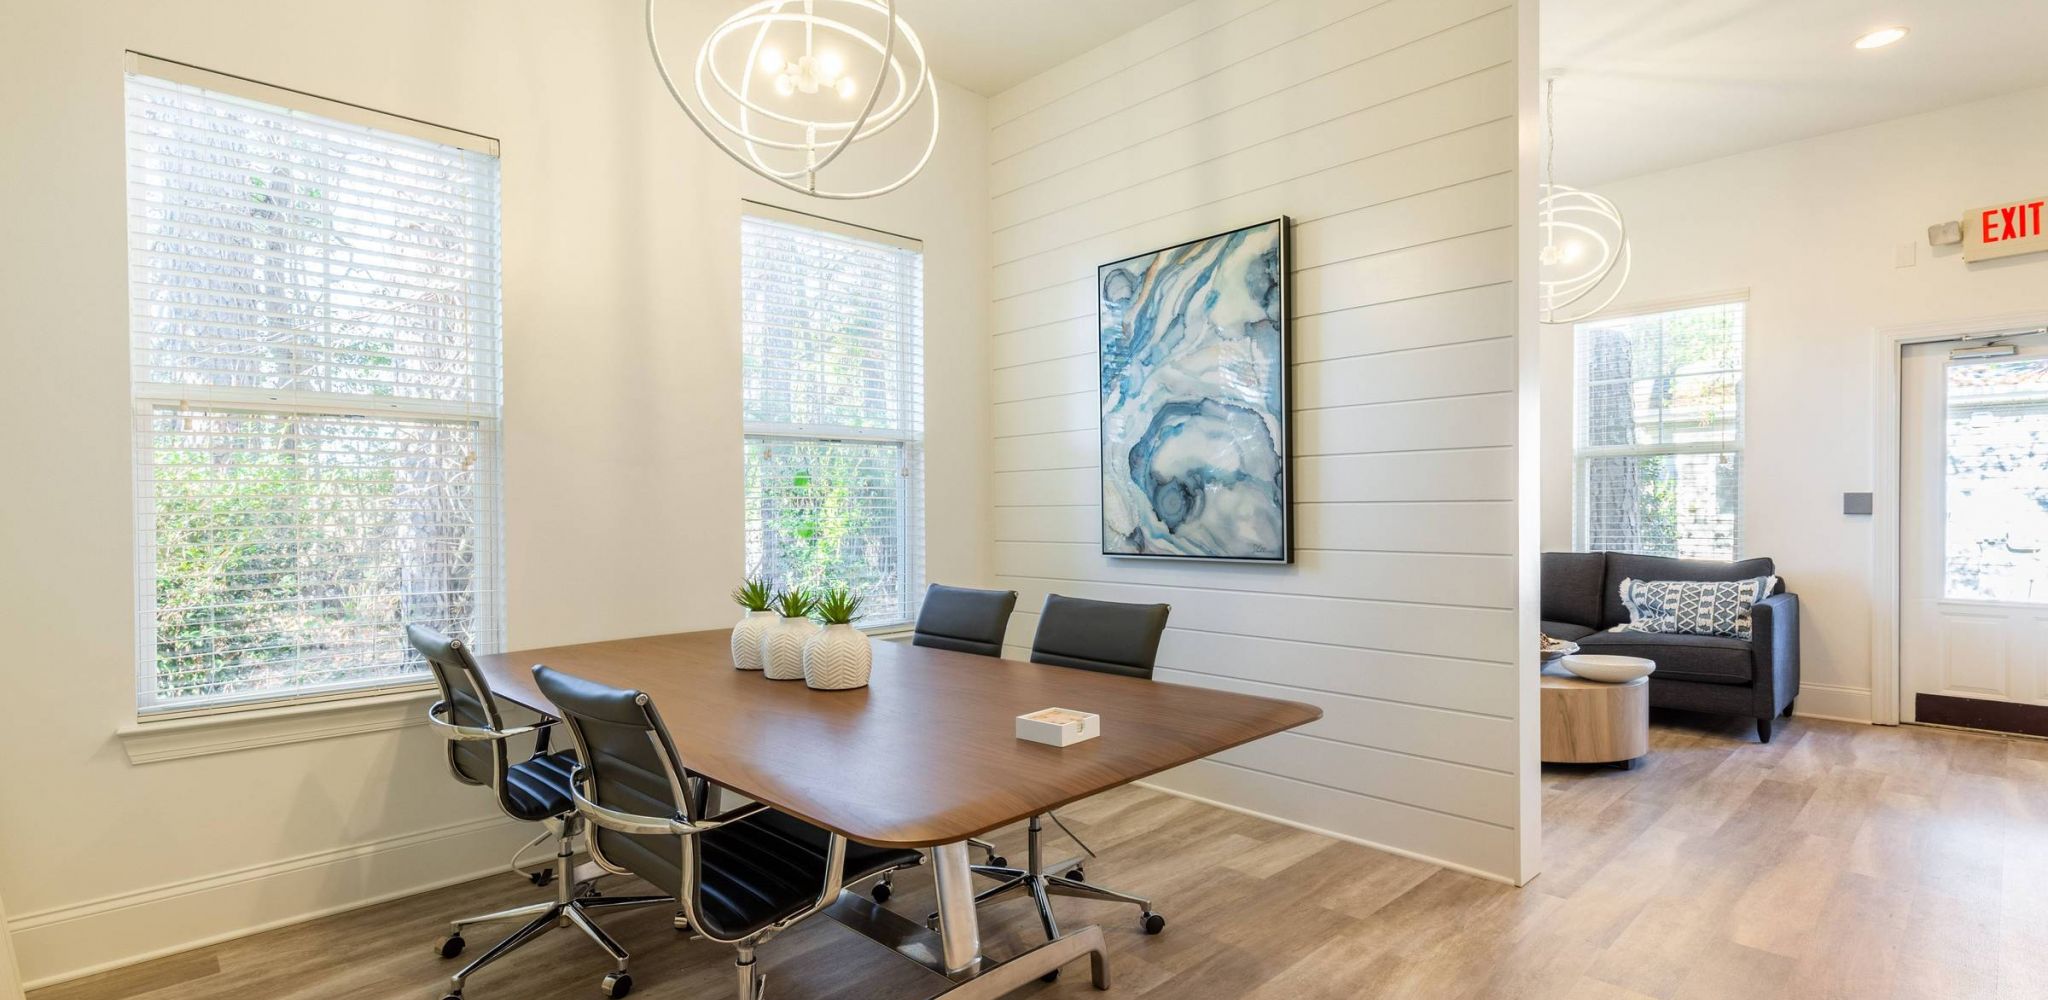 Hawthorne at Murrayville bright meeting room with large windows, a wooden table, black chairs, and abstract wall art